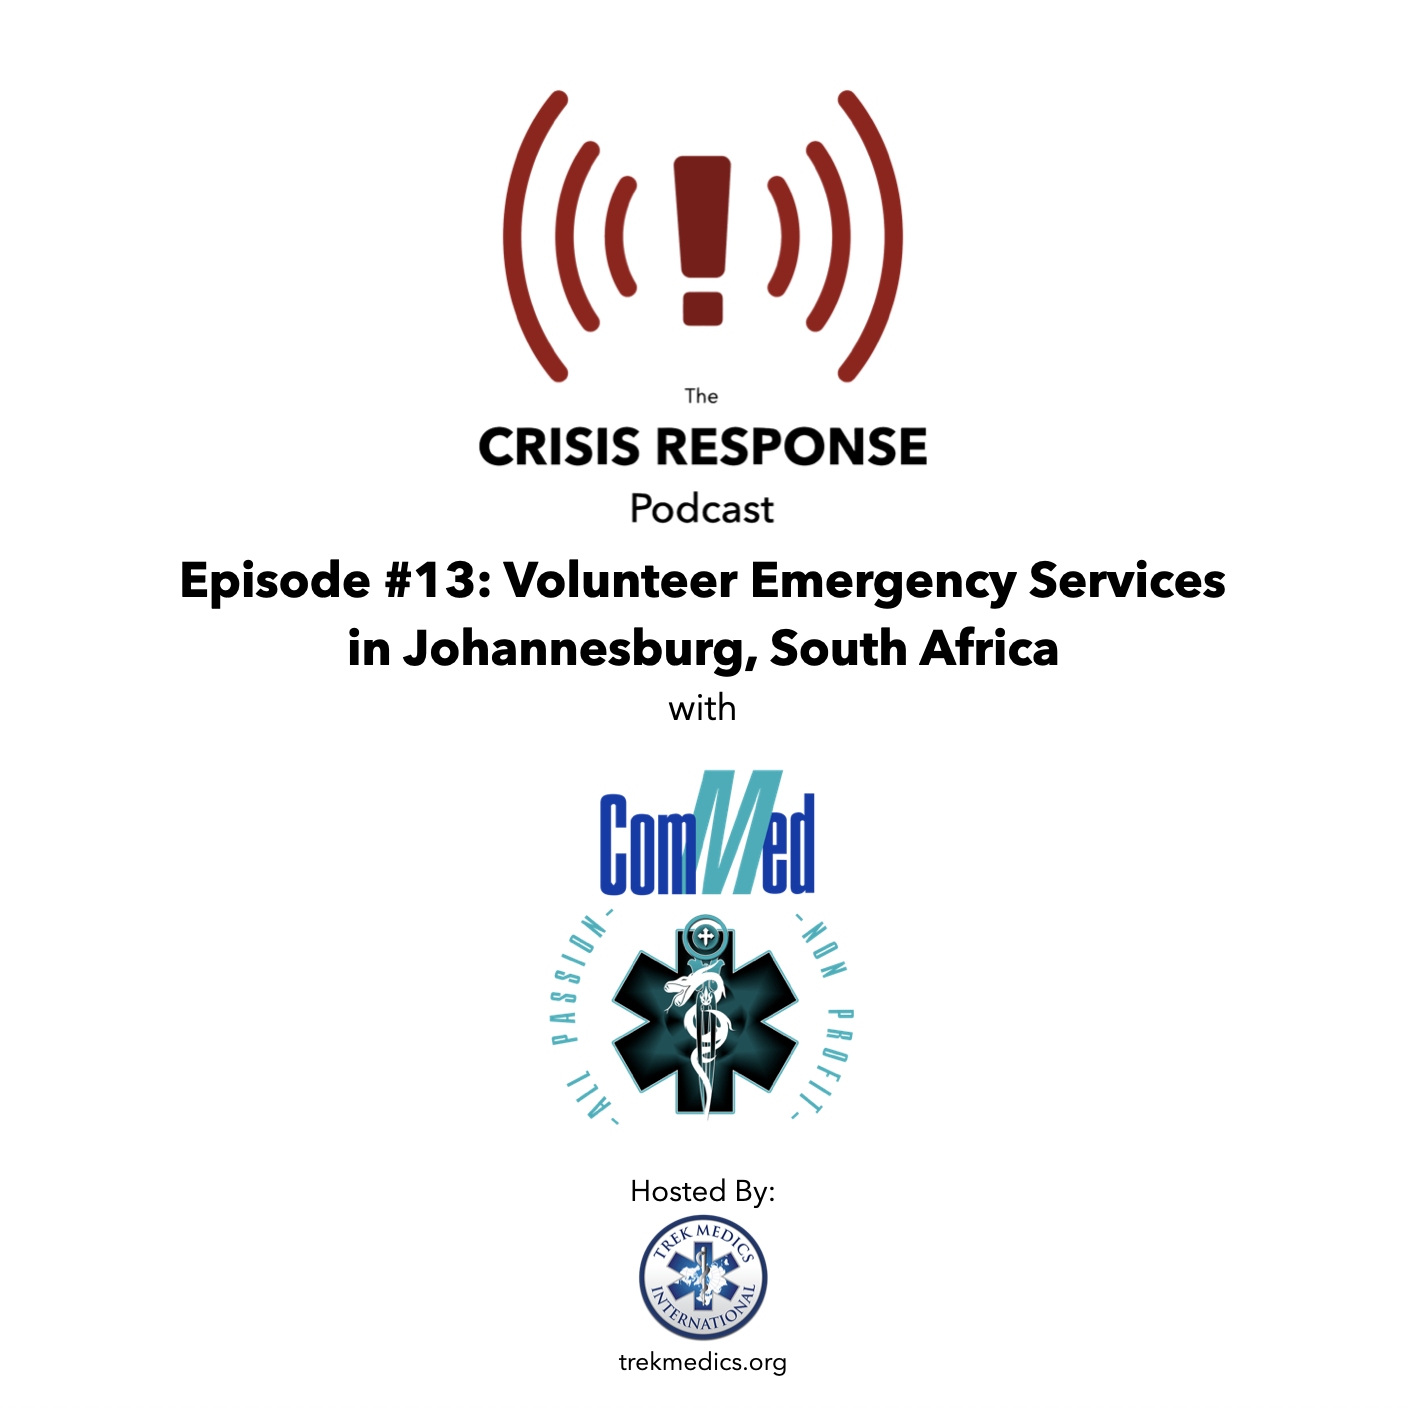 Crisis Response Podcast Episode 13 - Volunteer Emergency Services in Johannesburg, South Africa with ComMed